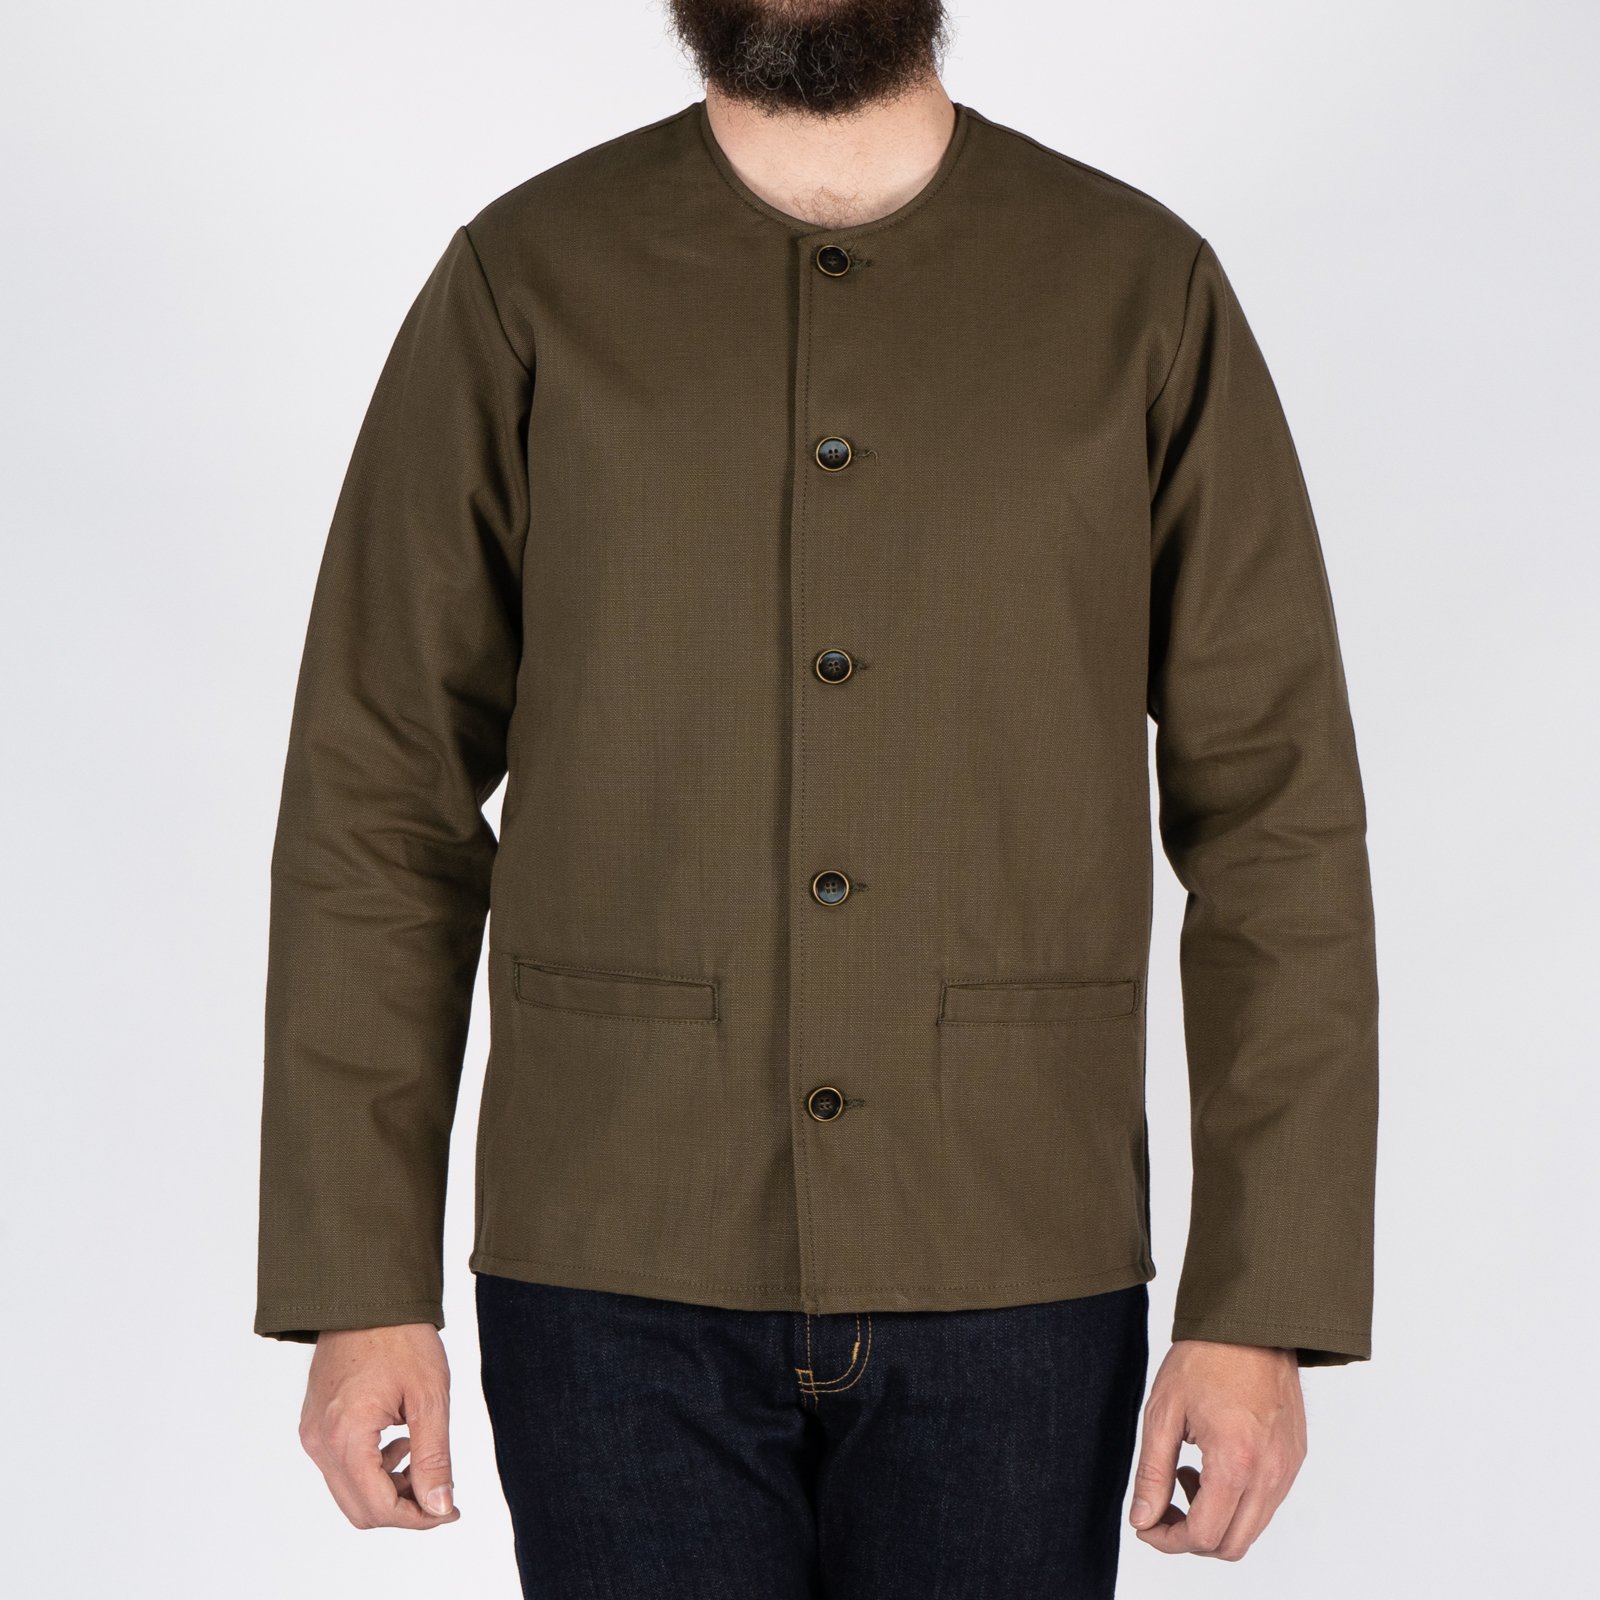  Smart Jacket - Raw Cotton Canvas - Olive - front 